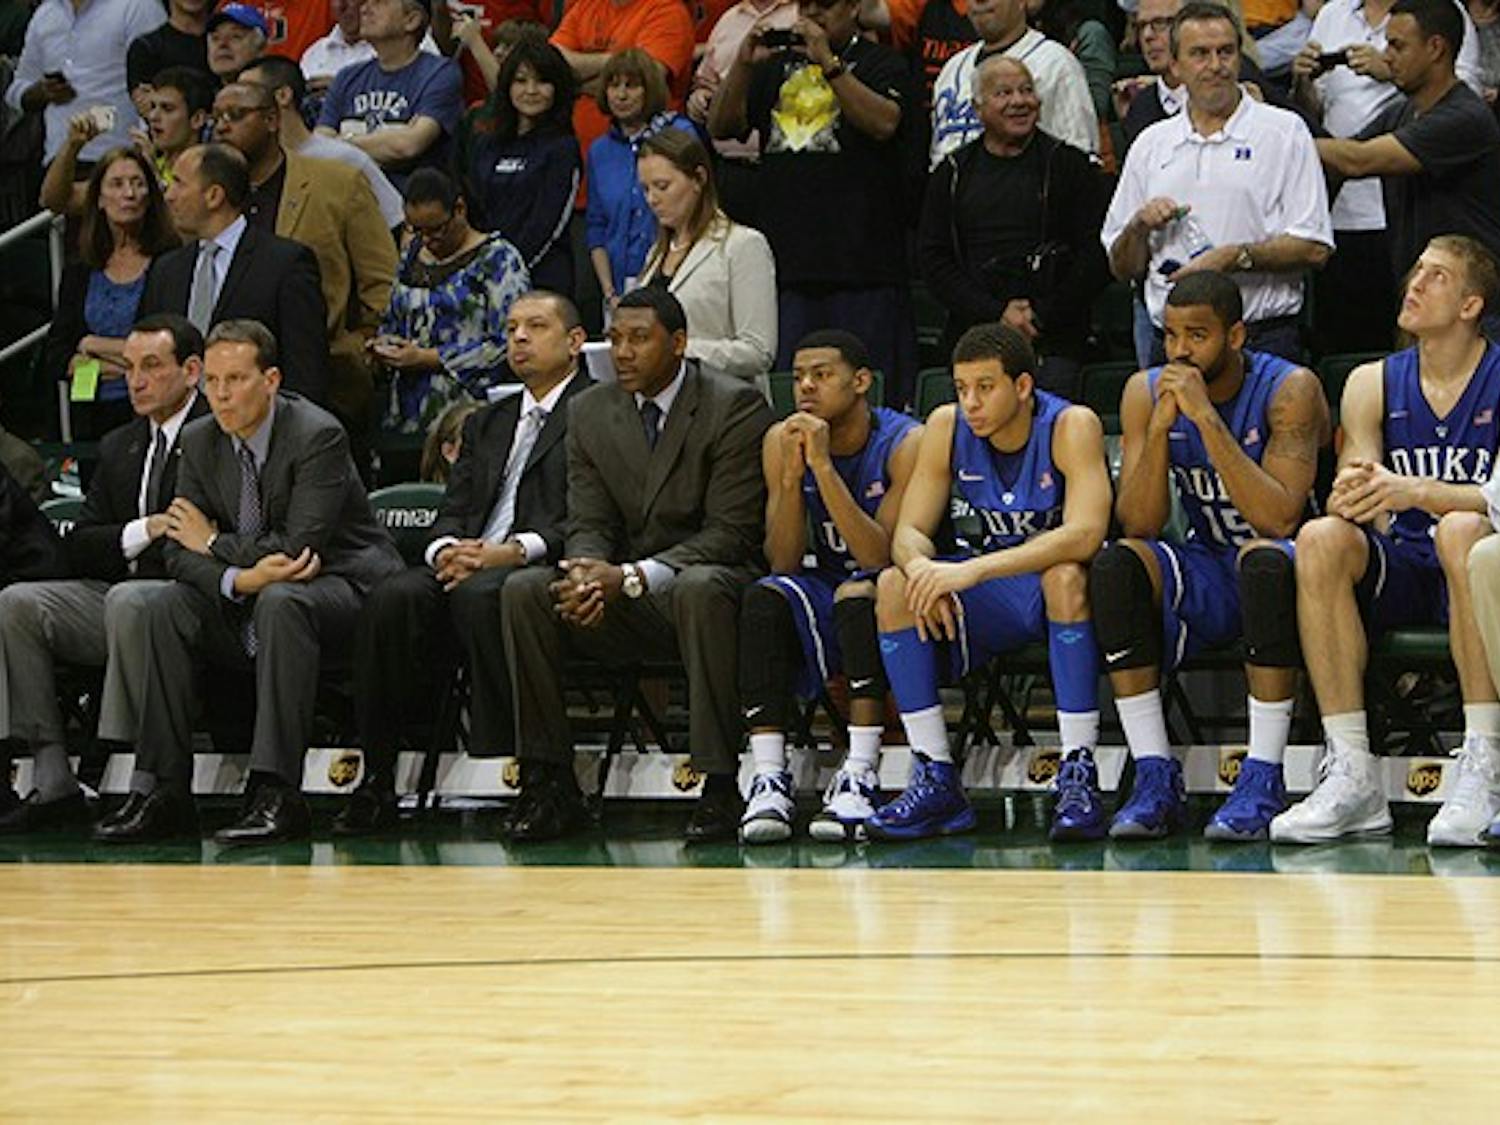 No. 1 Duke was stunned by No. 25 Miami, which went on a 25-1 run in the first half and never looked back.